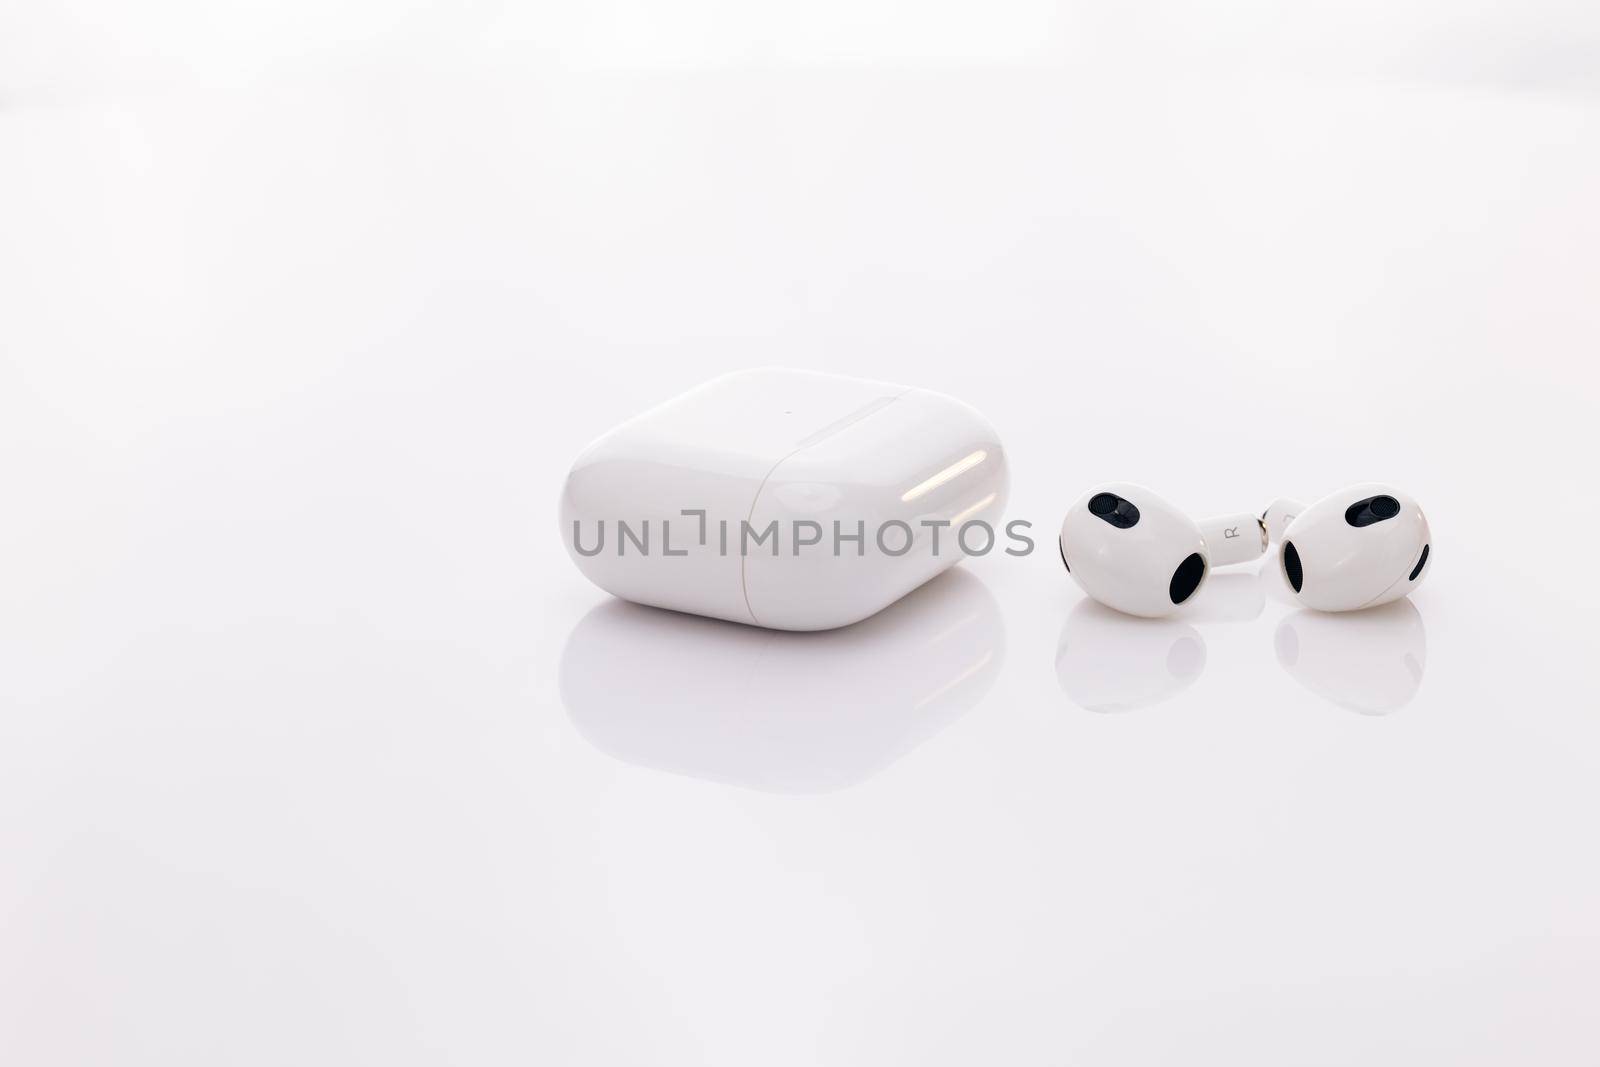 Wireless headphones with charging case. Wireless earphone with noise cancelling technology. Gadgets and electronic devices. Bluetooth headphones isolated on white background